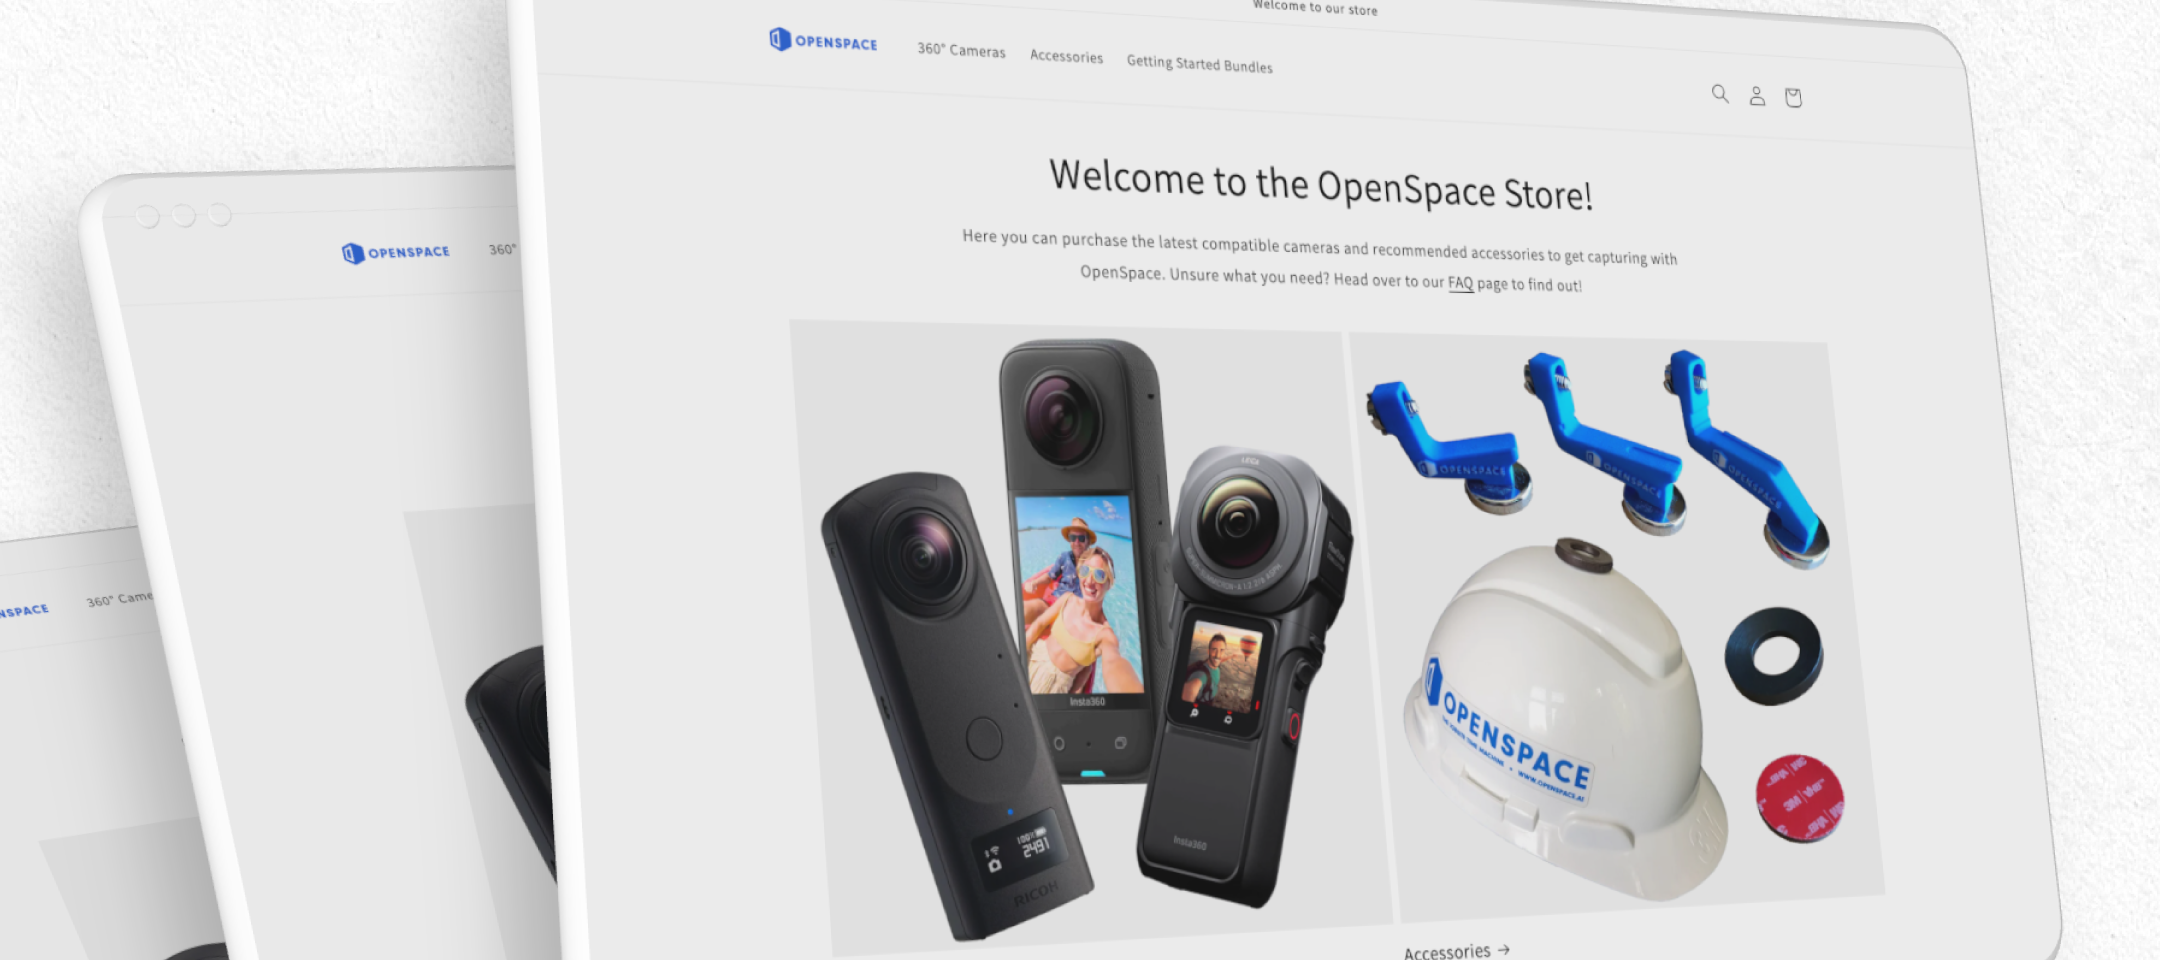 OpenSpace Store US is Now Open!